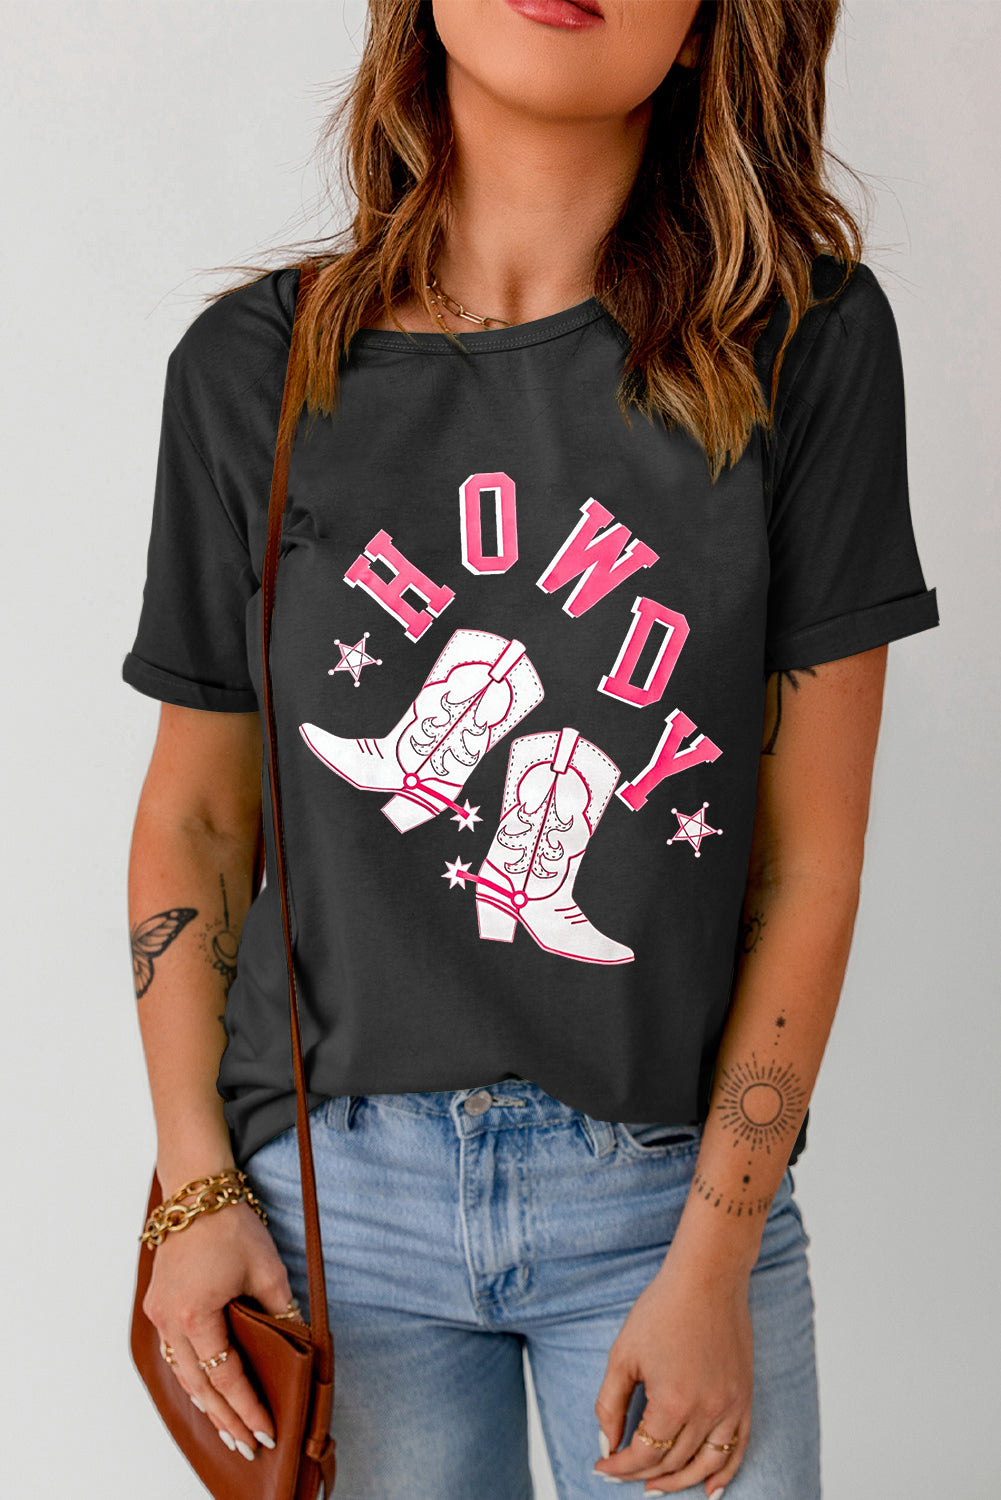 HOWDY Cowboy Boots Graphic Tee free shipping -Oh Em Gee Boutique